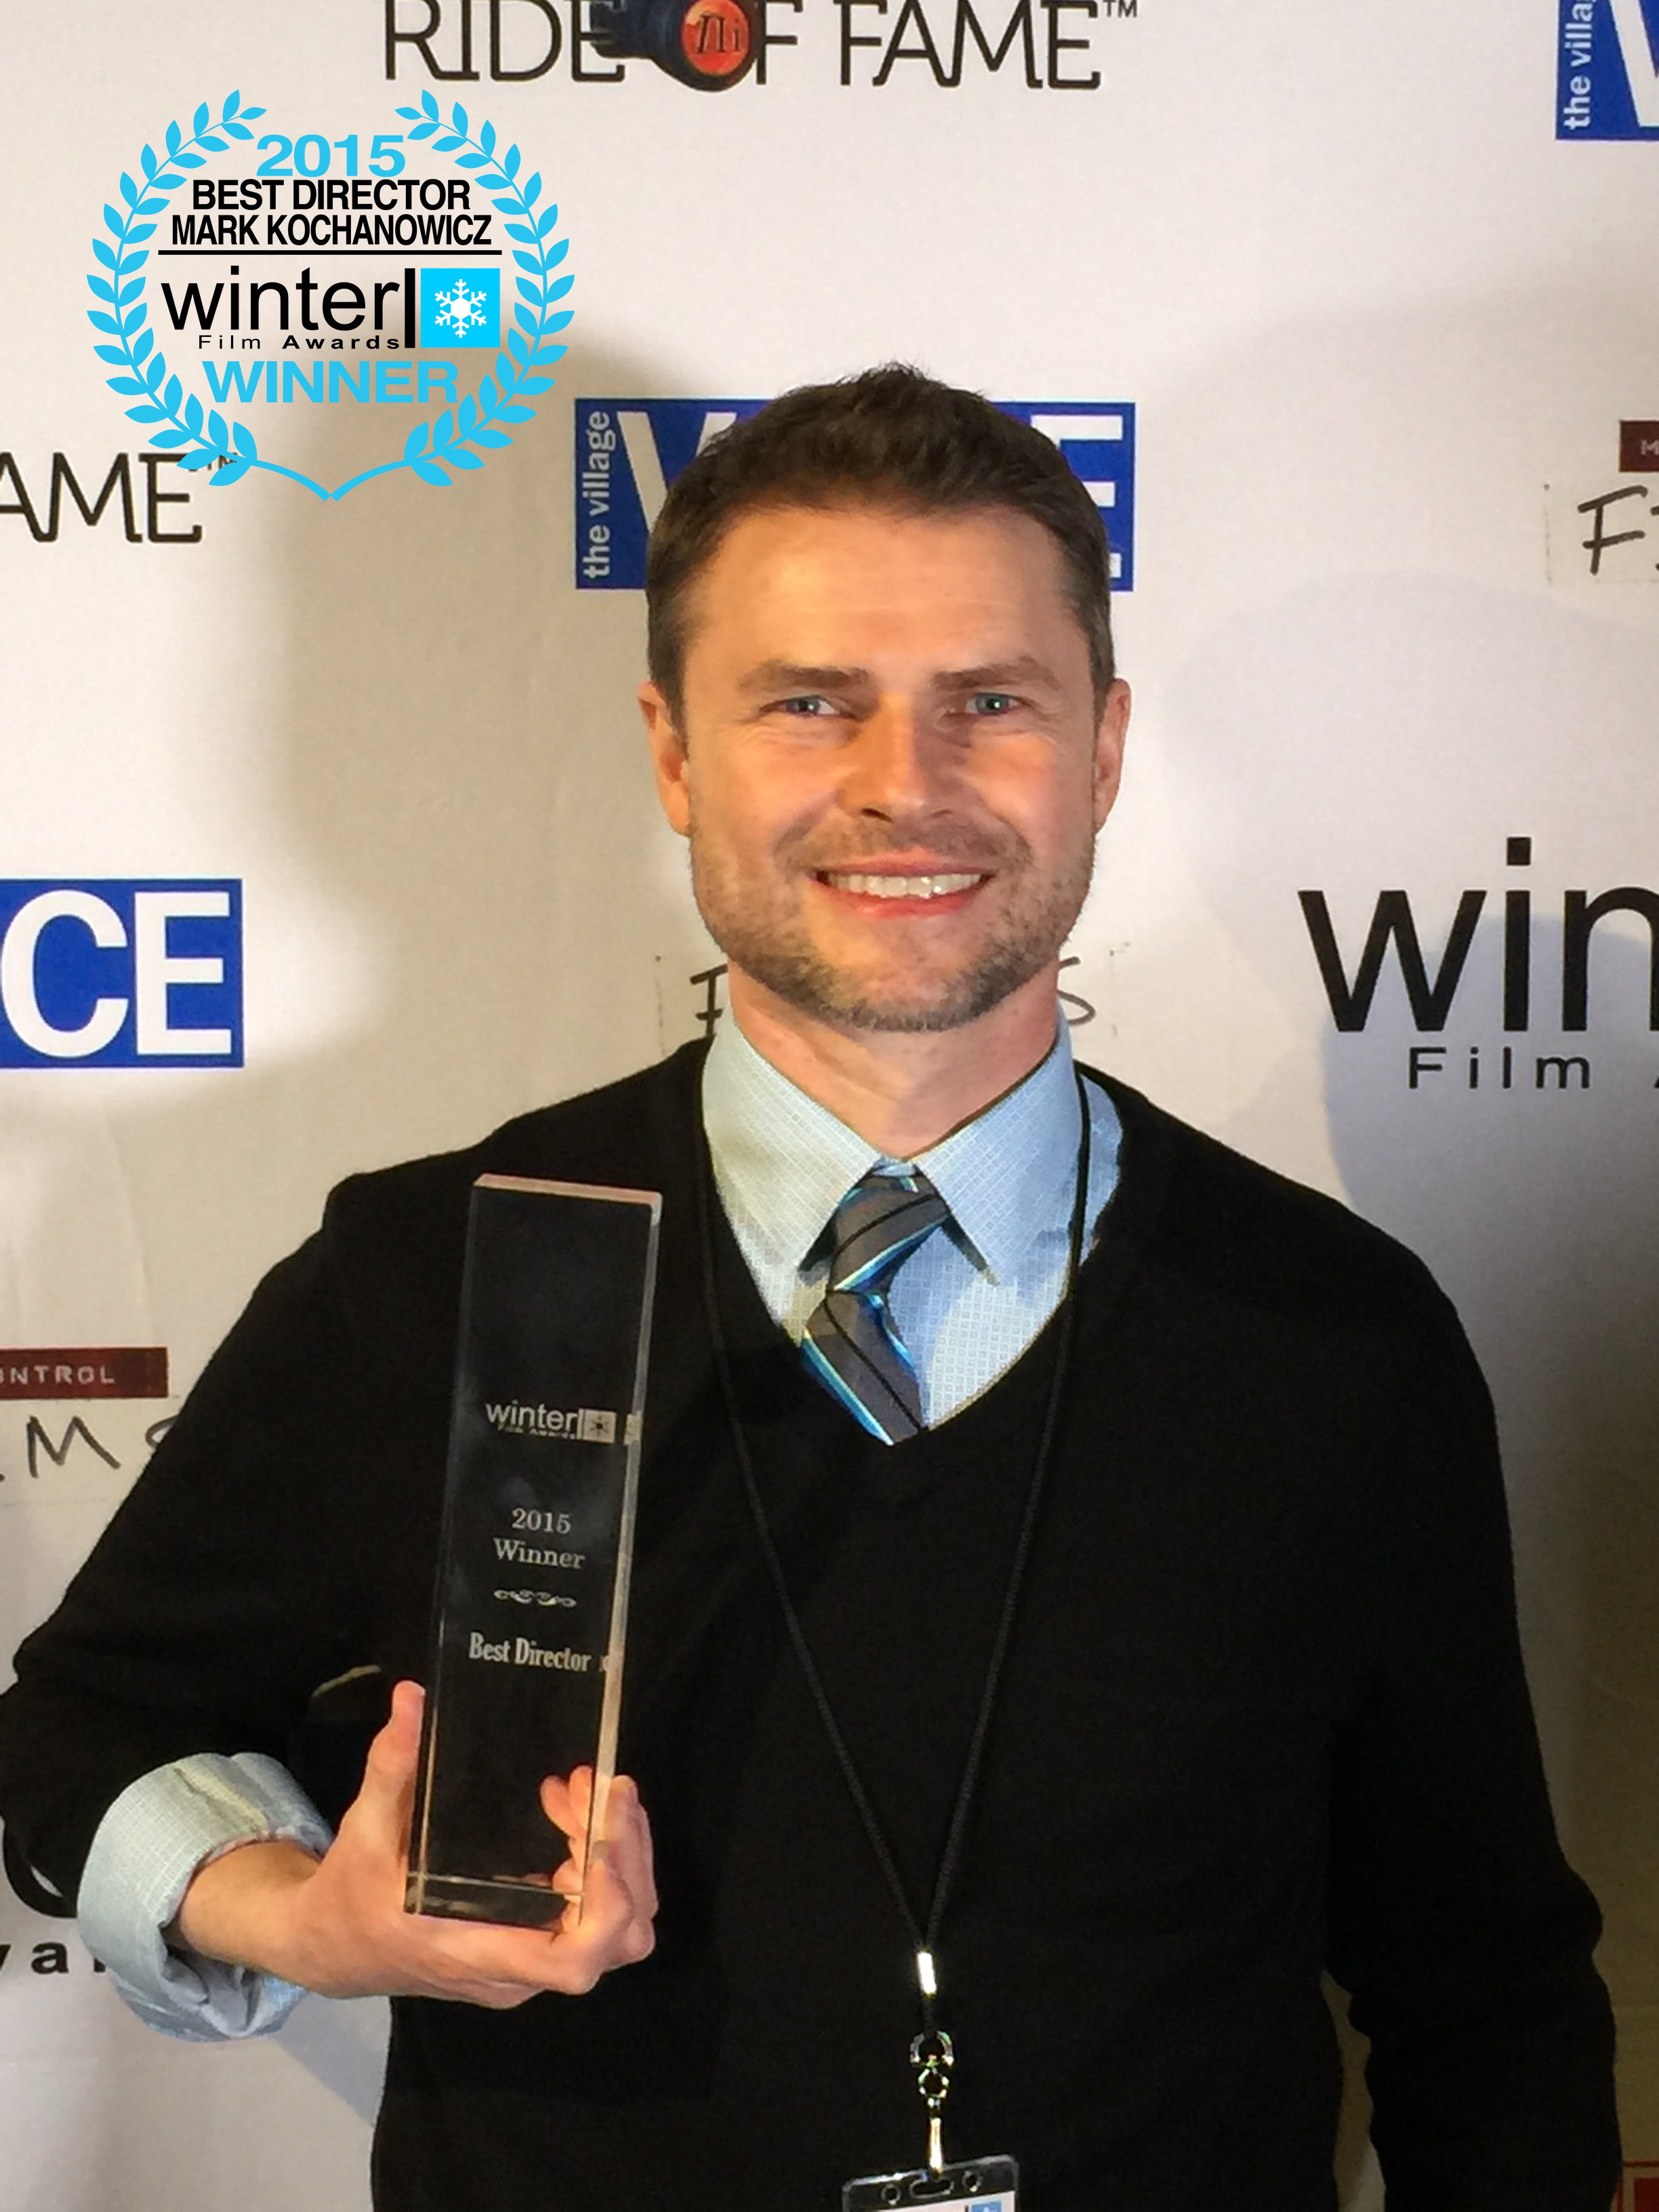 Mark Kochanowicz wins the Best Director Award at the 2015 Winter Film Awards in New York City for 